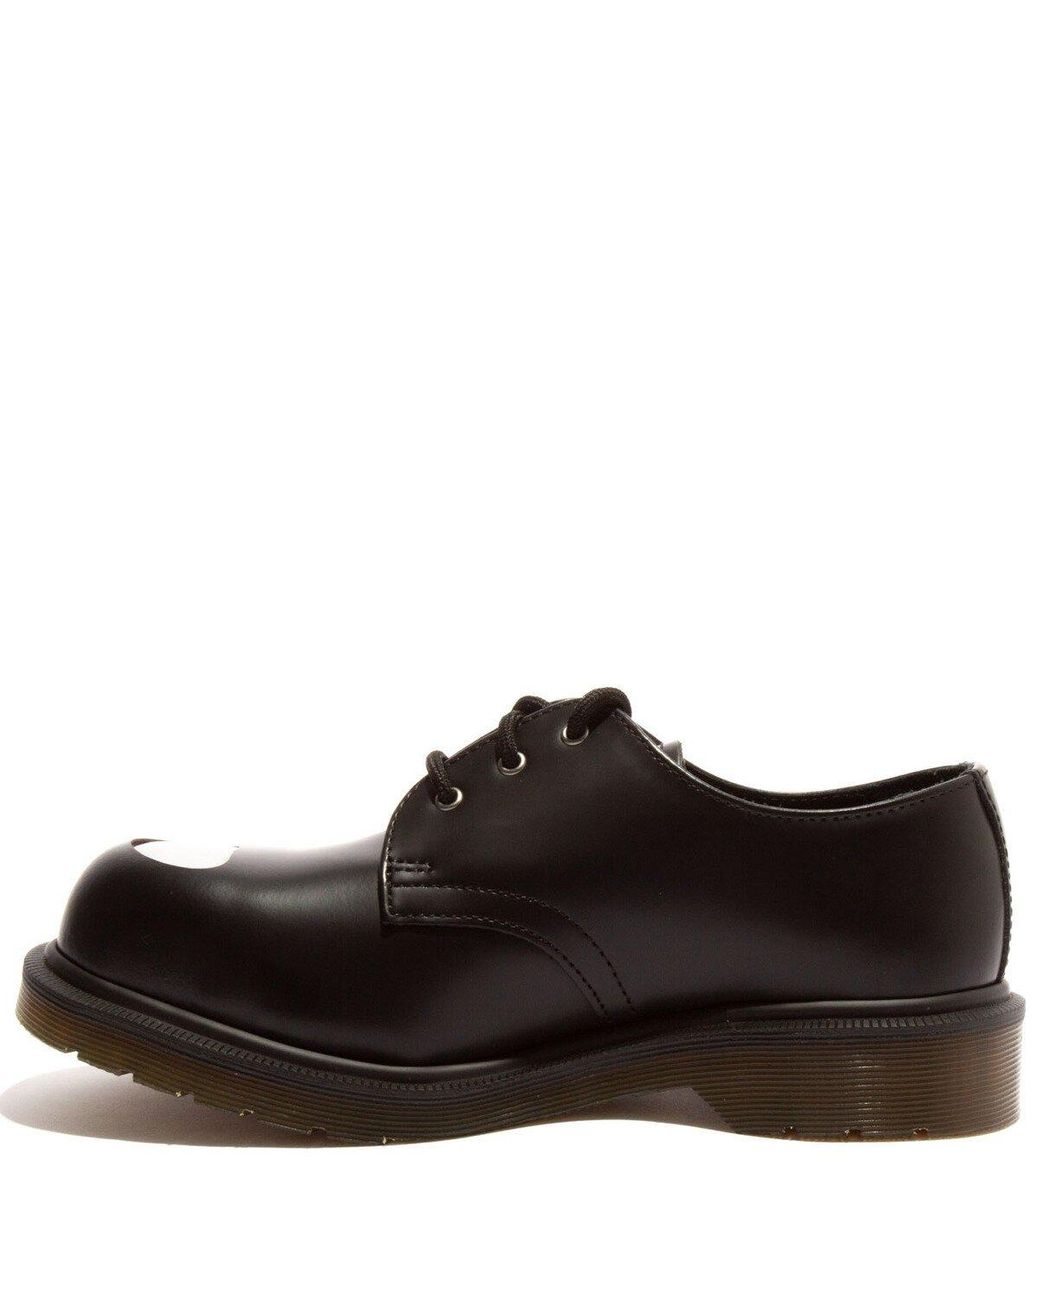 Dr. Martens 1925 Exposed Steel Toe Leather Shoes in Black | Lyst